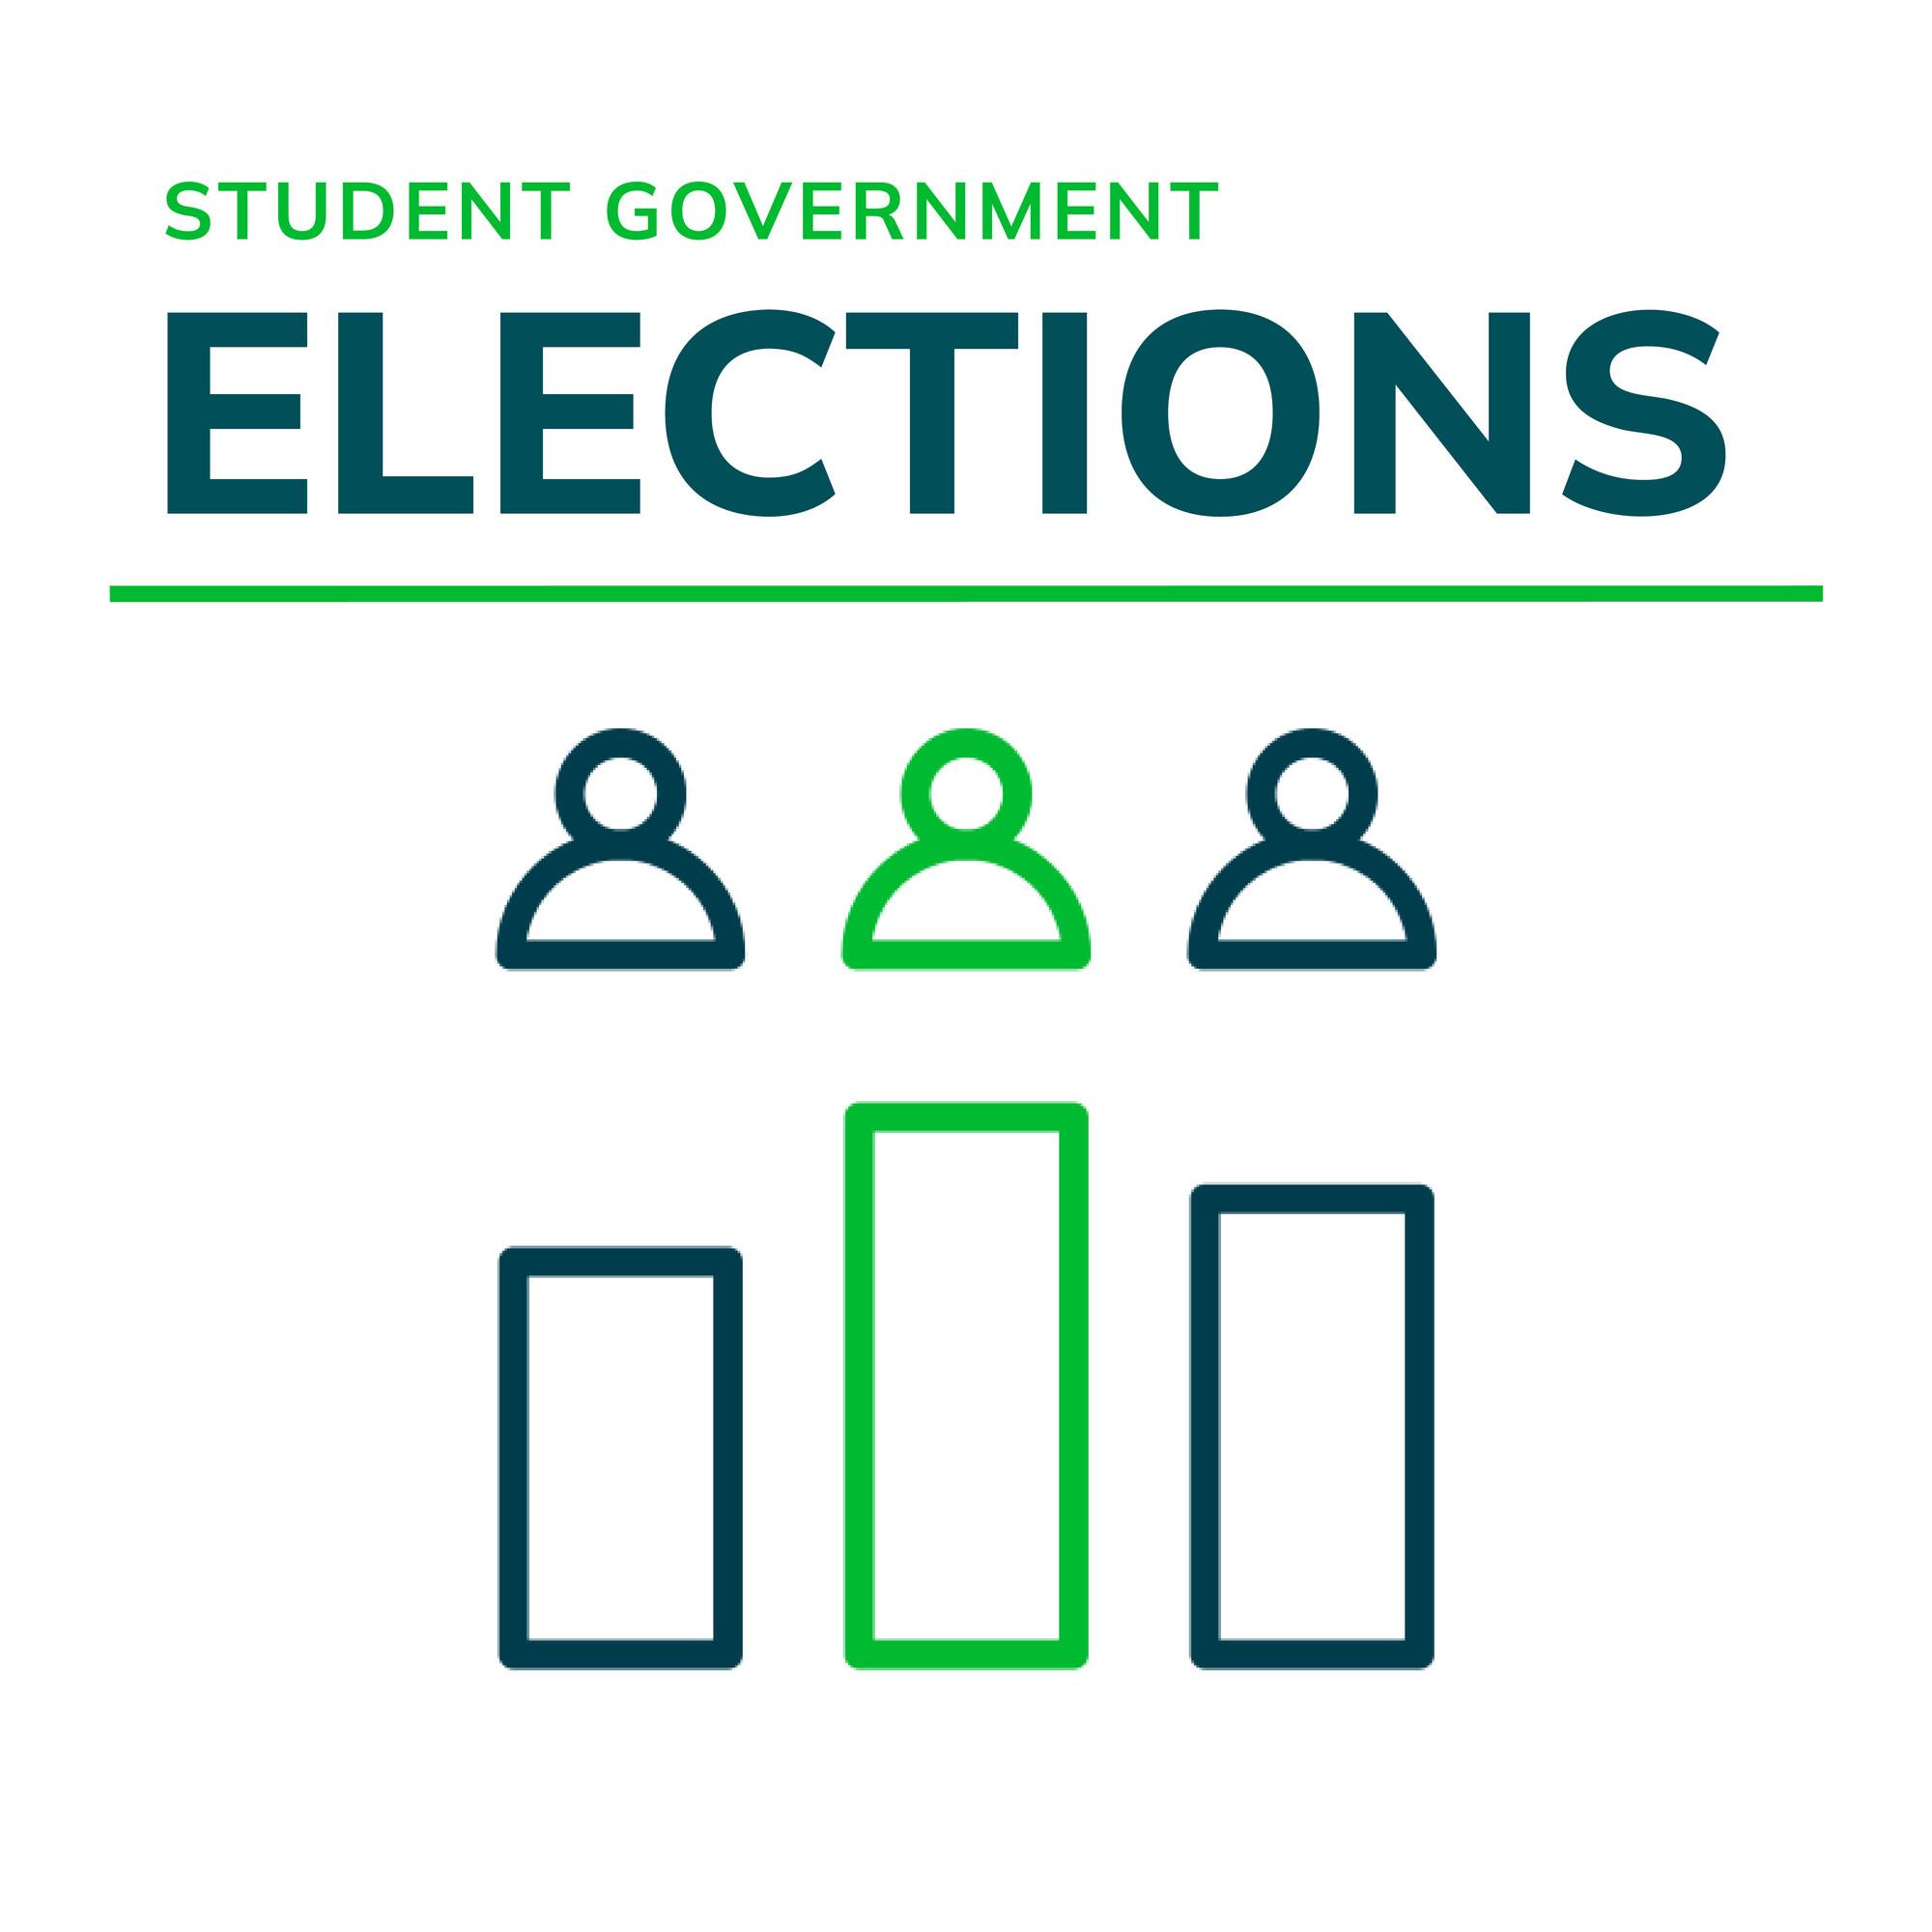 A graphic advertising student government elections.